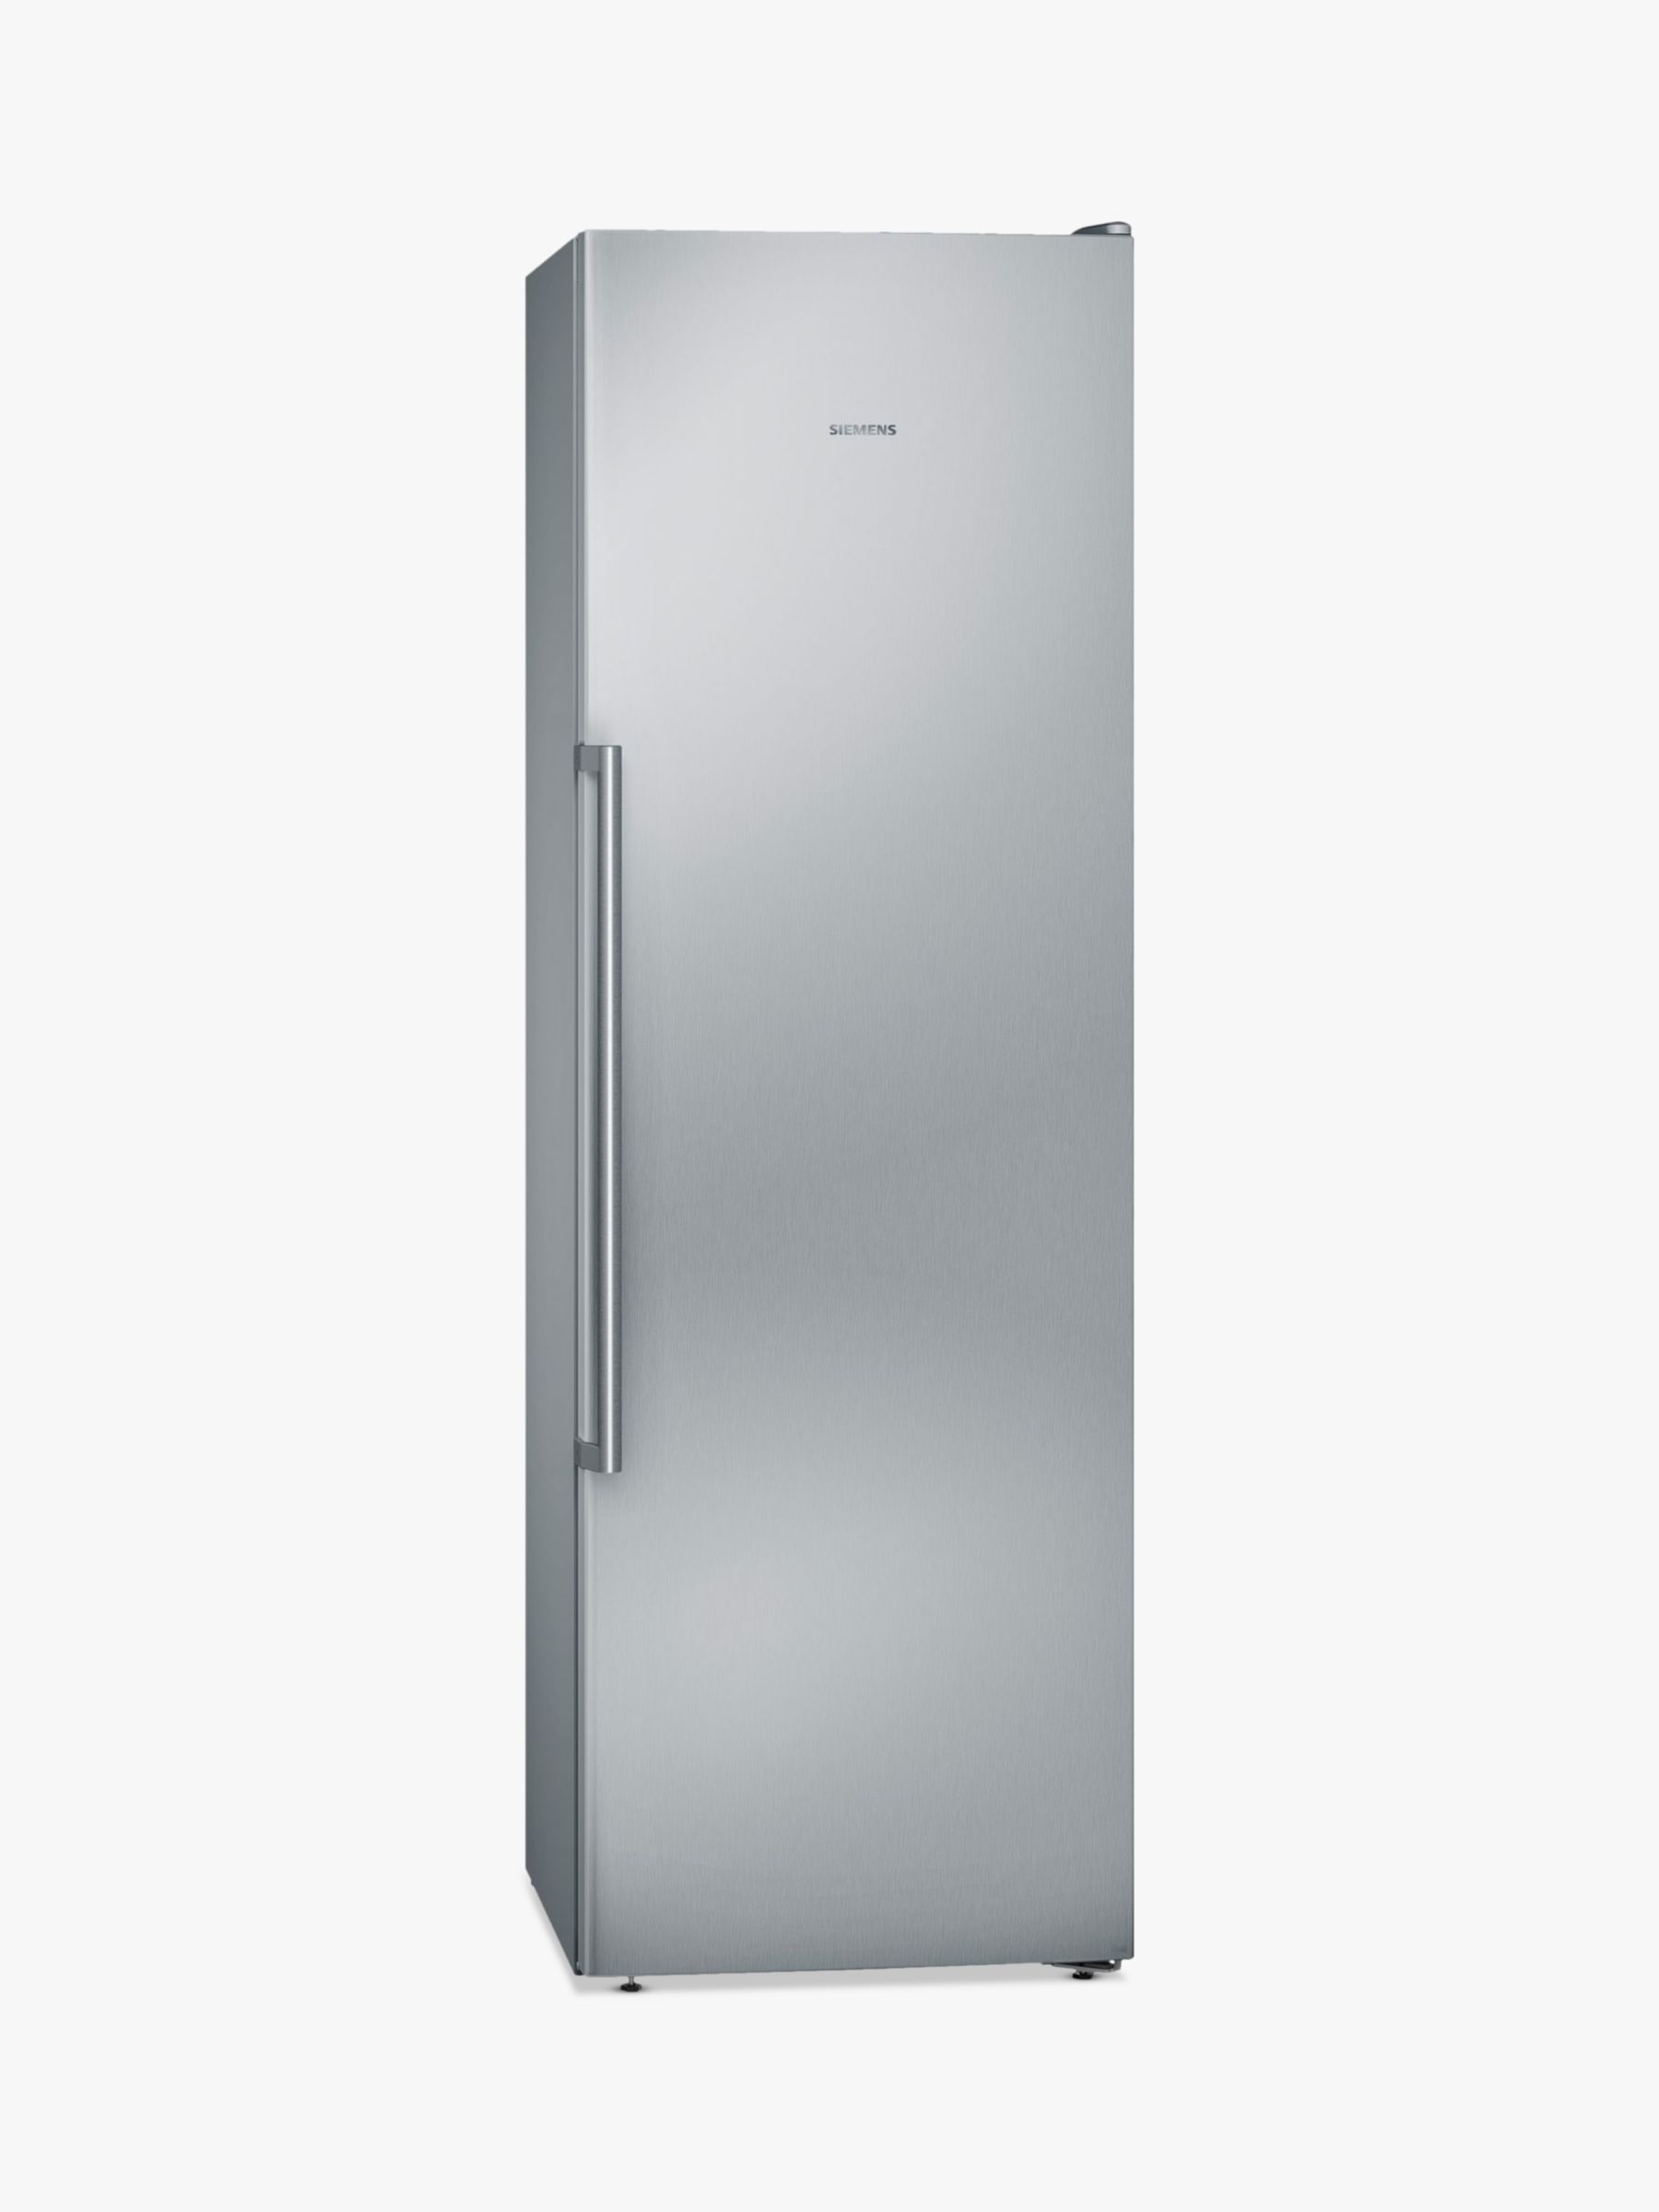 Siemens GS36NAI3P Tall Freezer, A++ Energy Rating, 60cm Wide, Silver